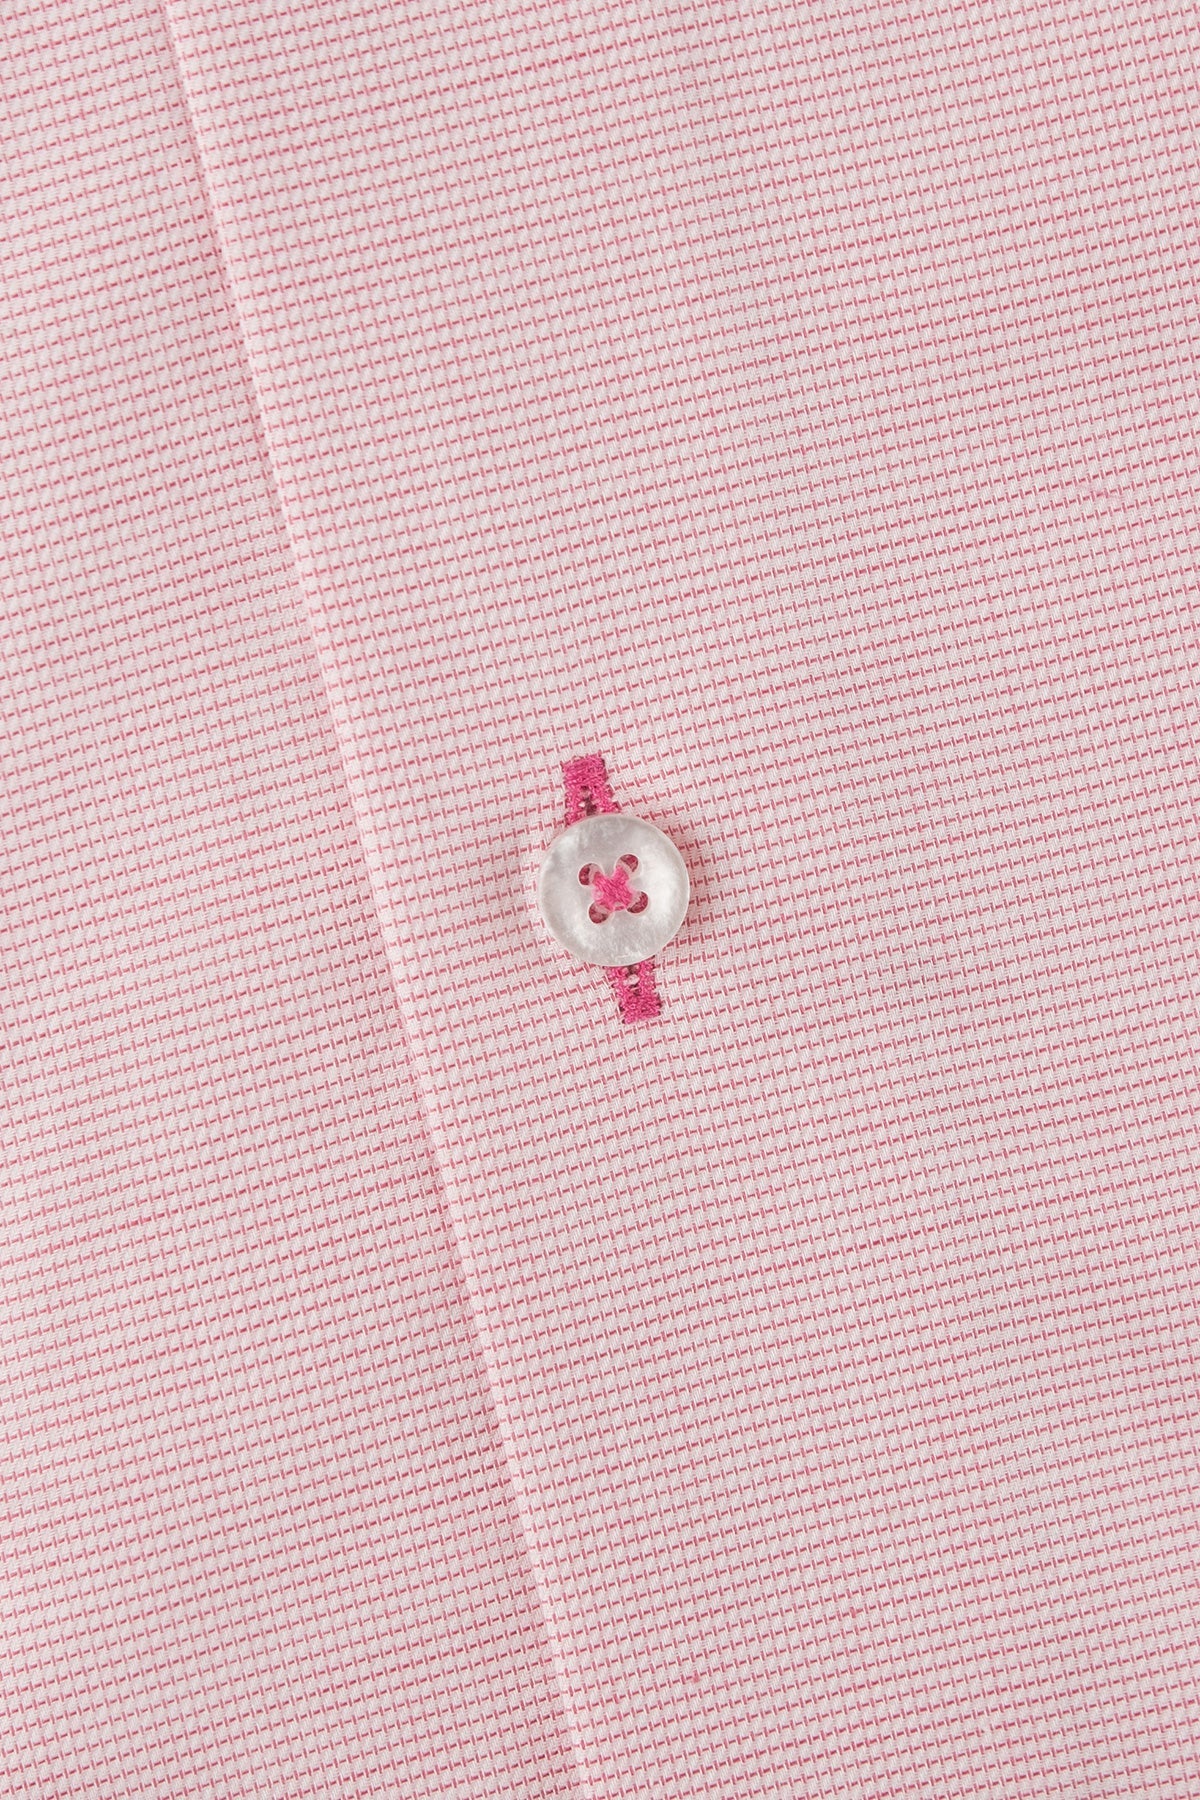 Pink slim fit shirt with contrast details Pink